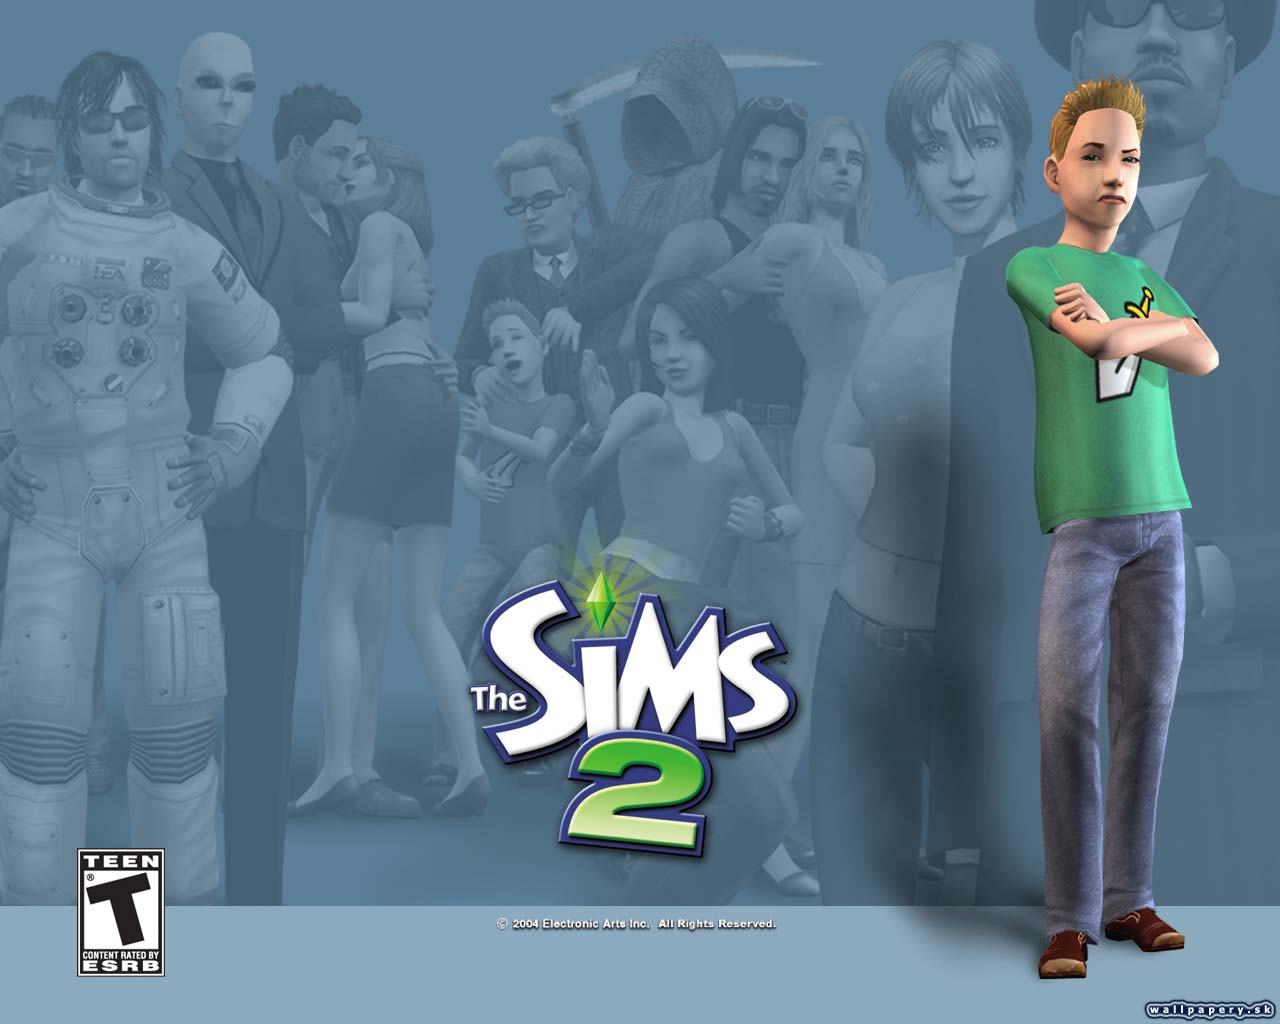 The Sims 2 - wallpaper 19